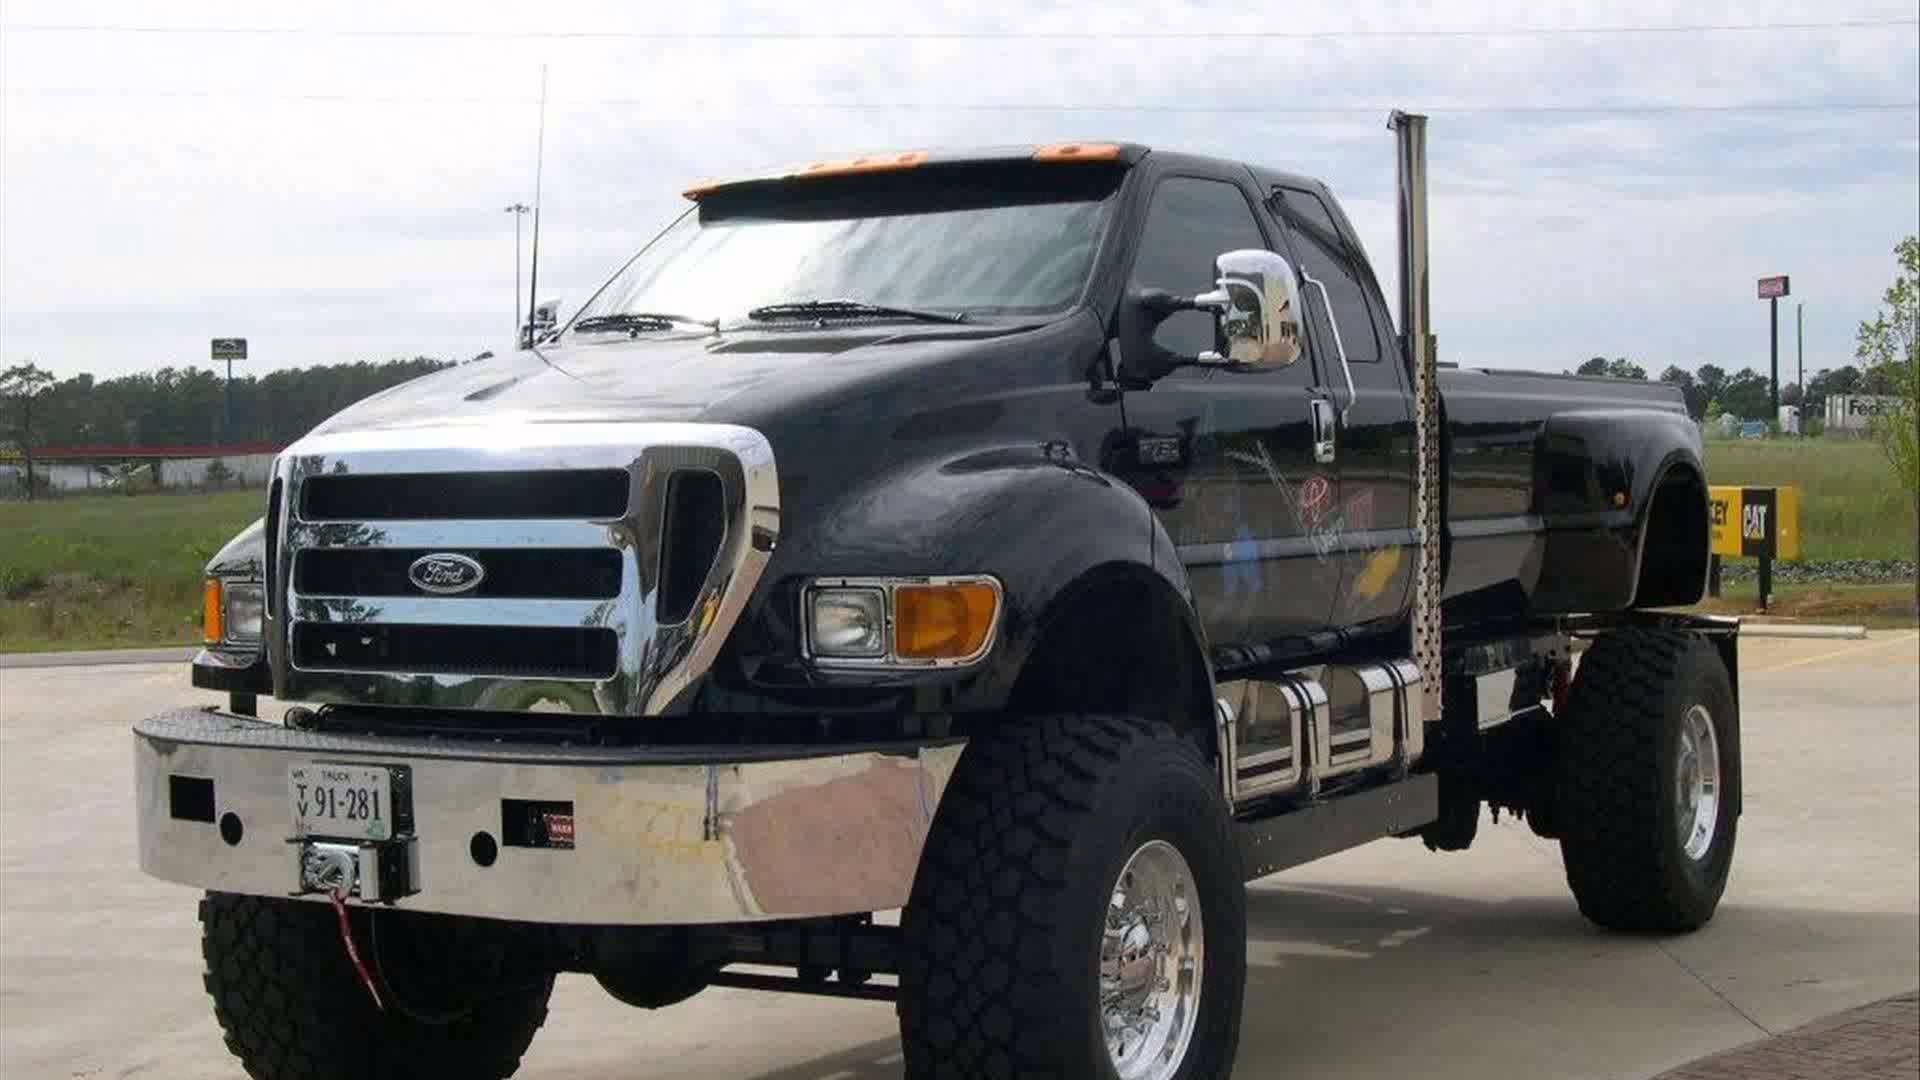 Ford F650 Xlt Wallpapers